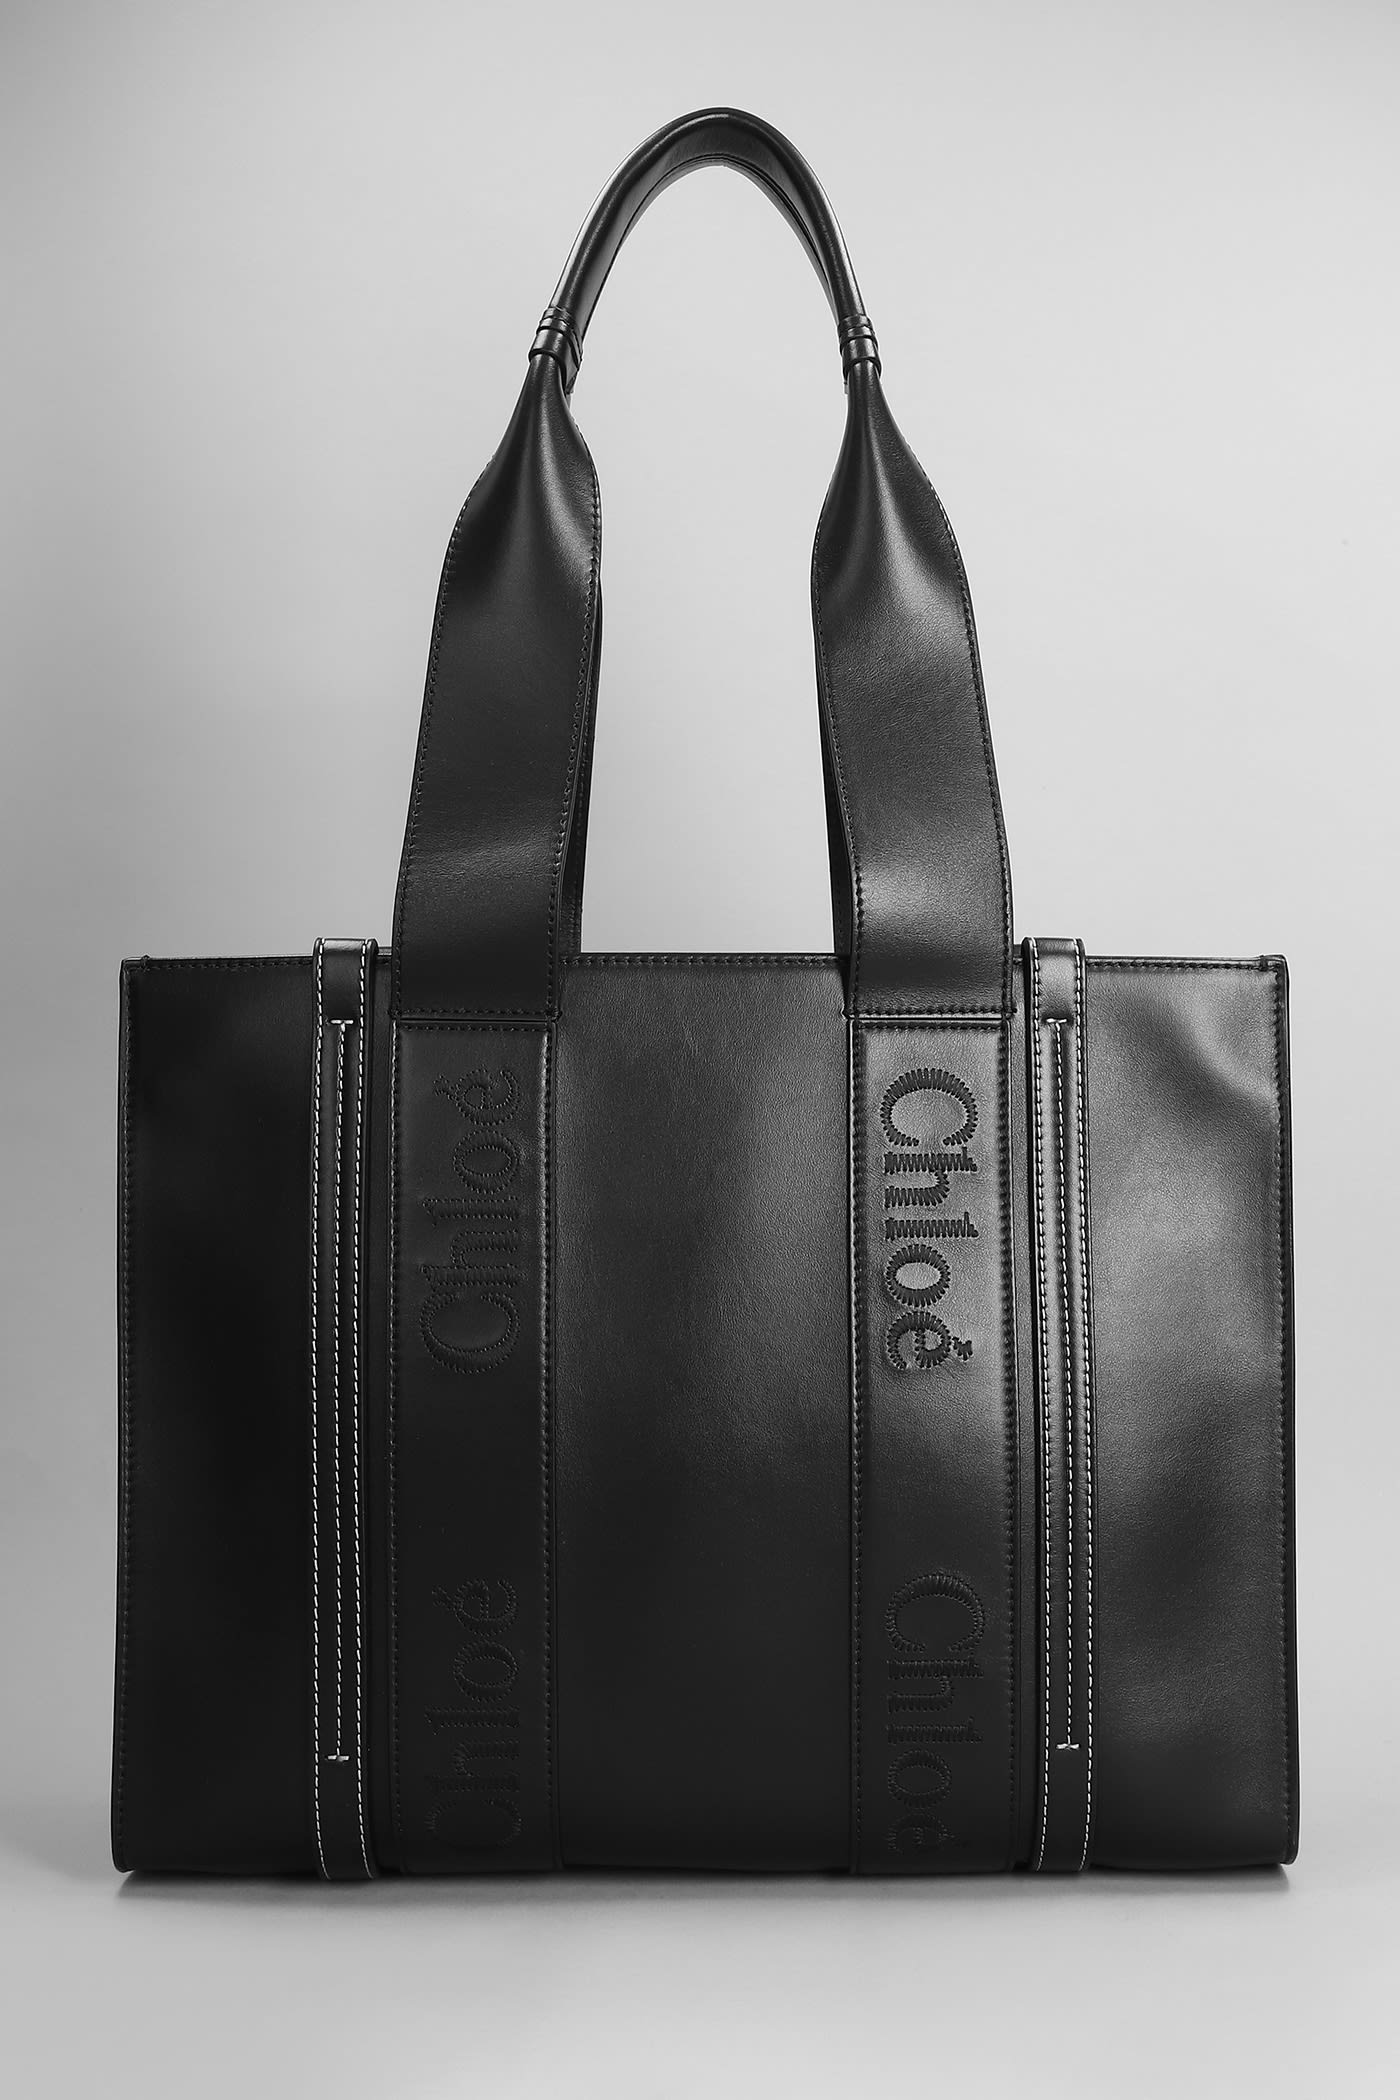 CHLOÉ WOODY TOTE IN BLACK LEATHER